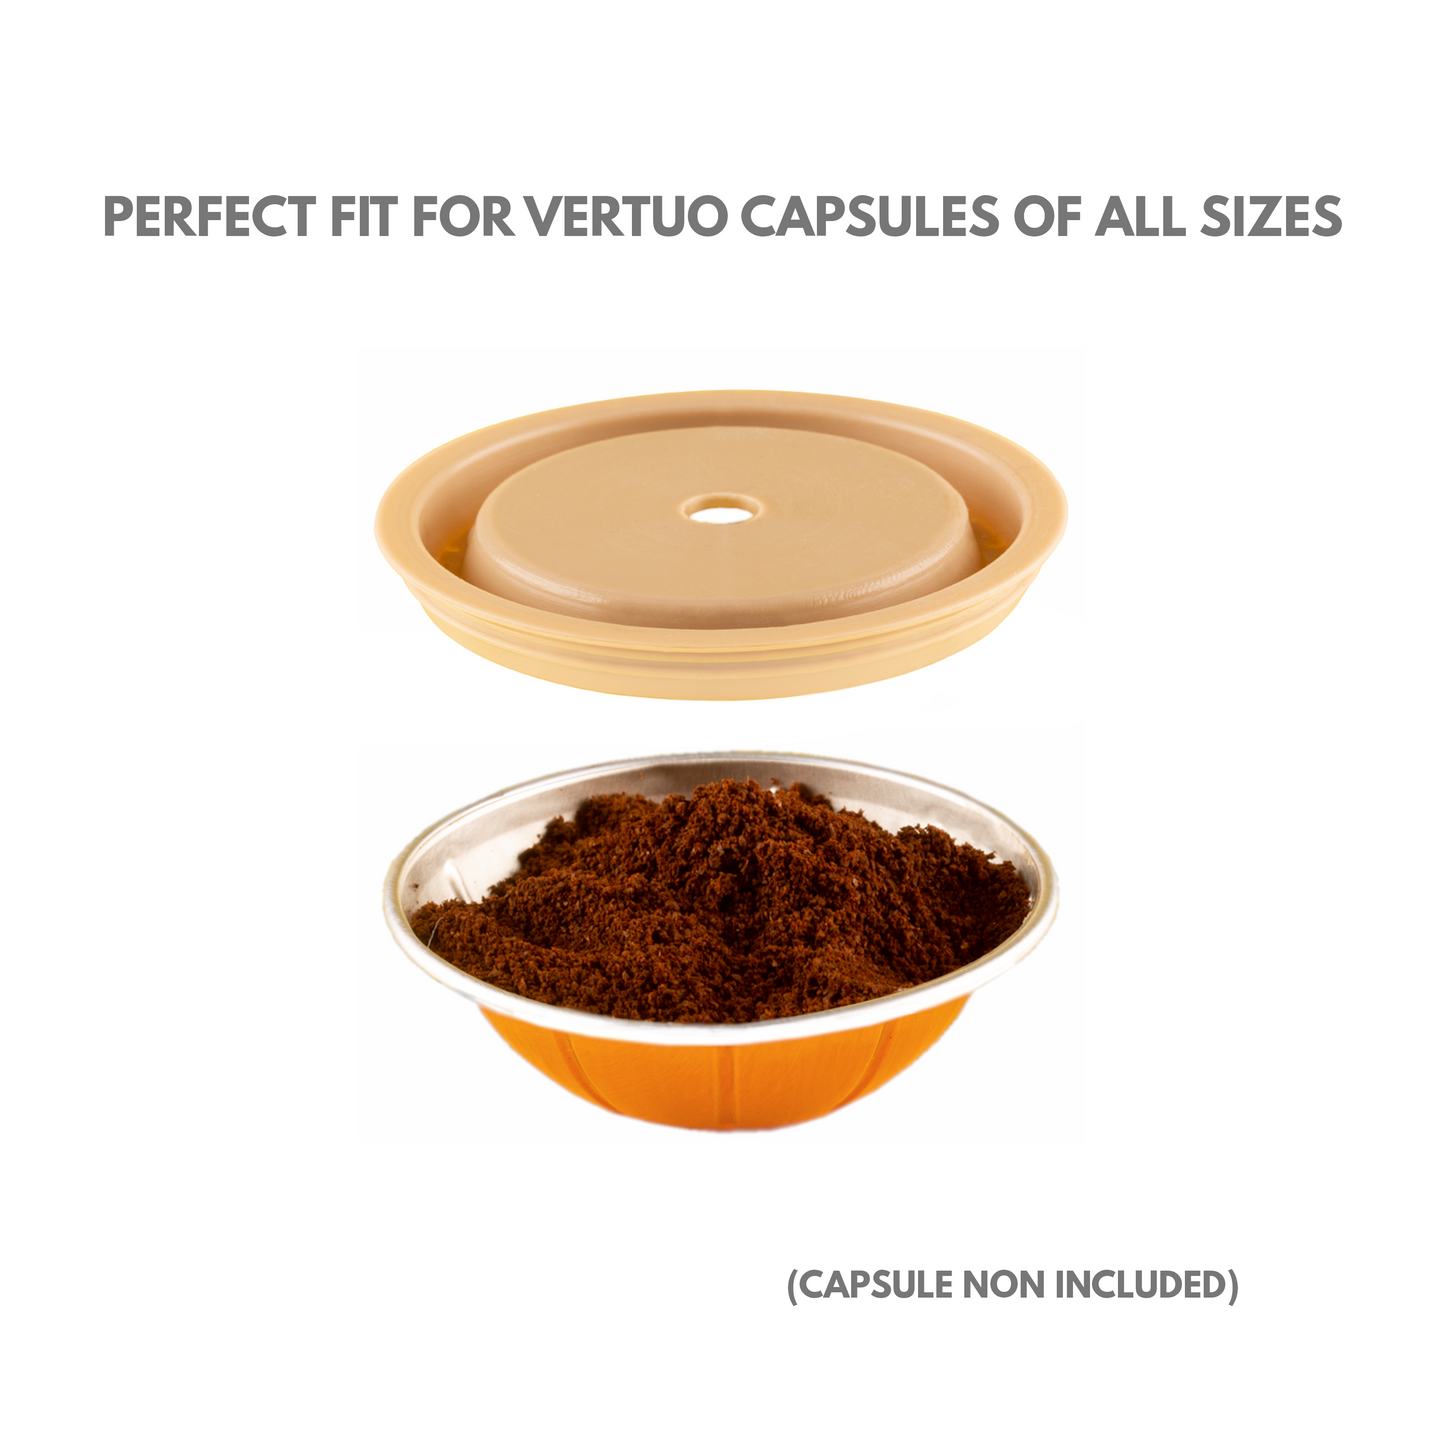 Reusable and Refillable Cap Compatible with Nespresso VertuoLine. Pack of 4 Caps